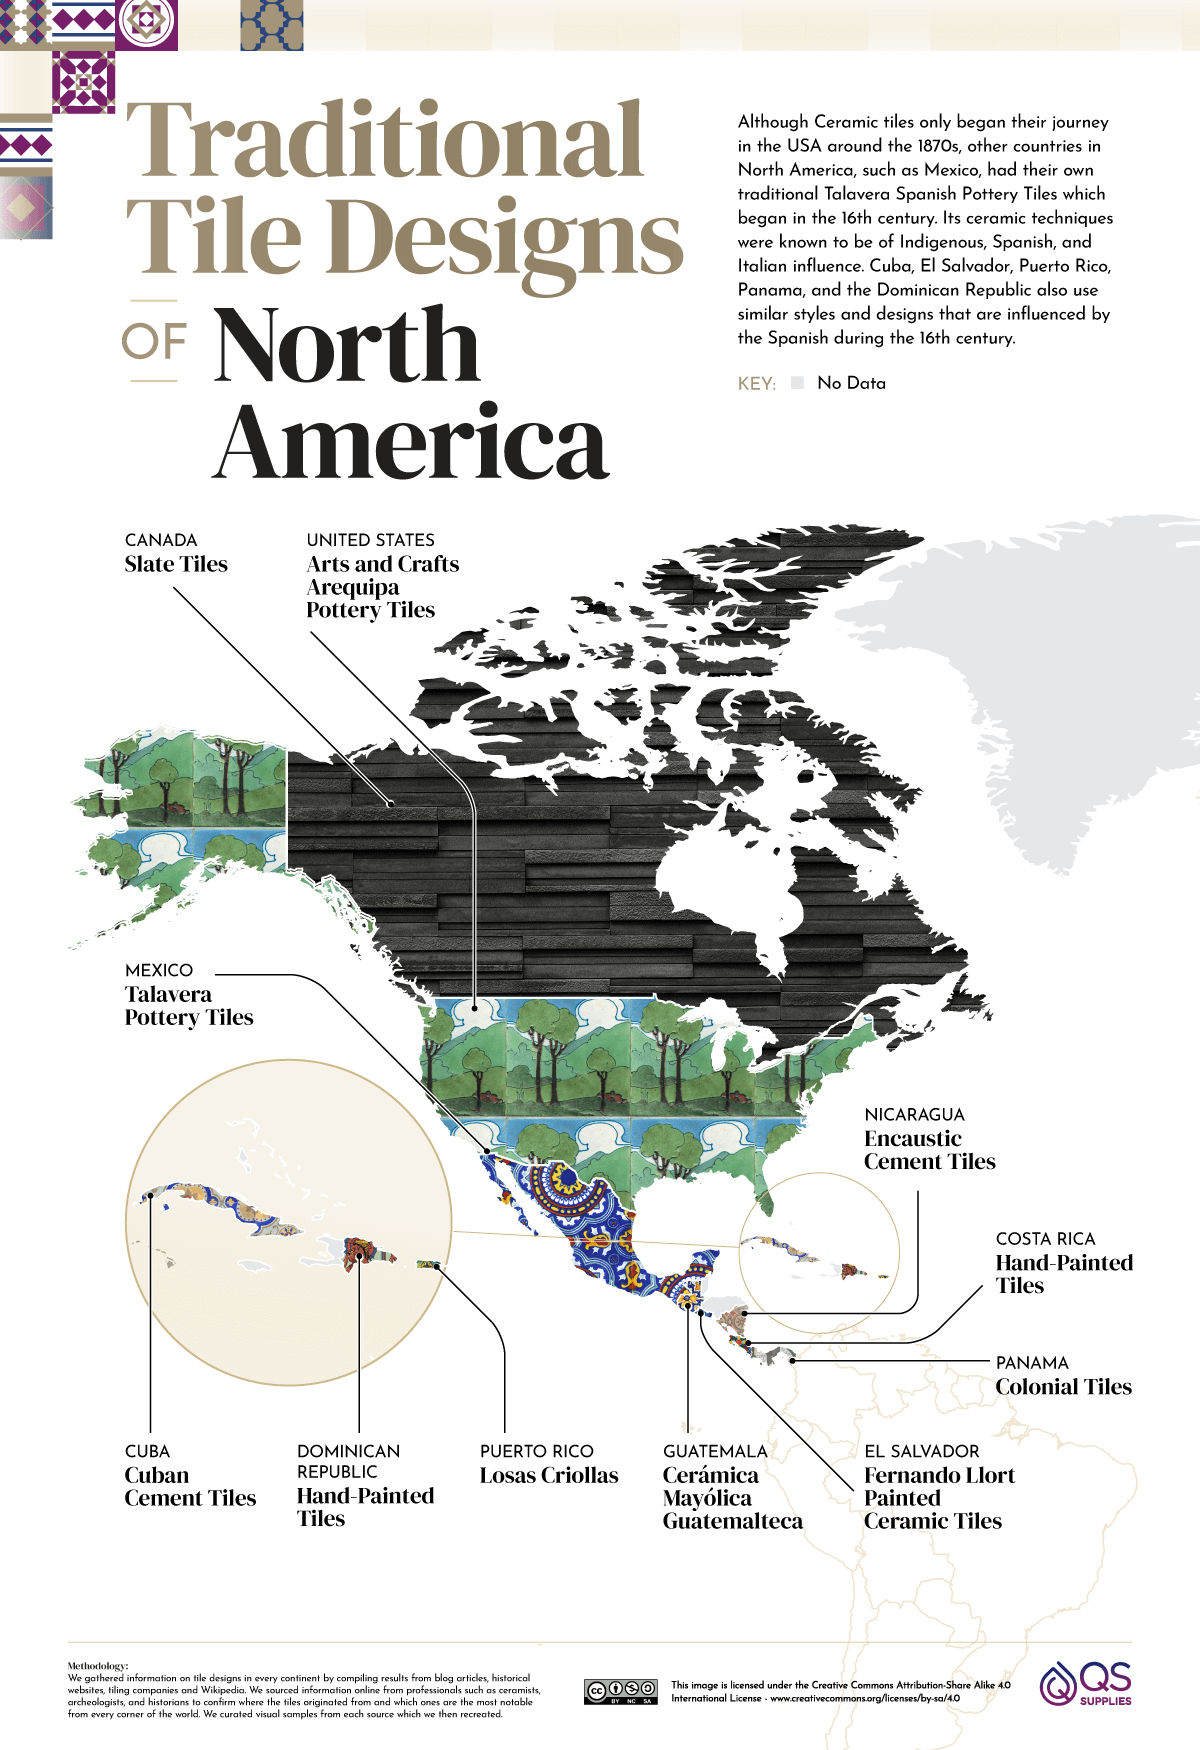 Traditional Tile Designs of North America